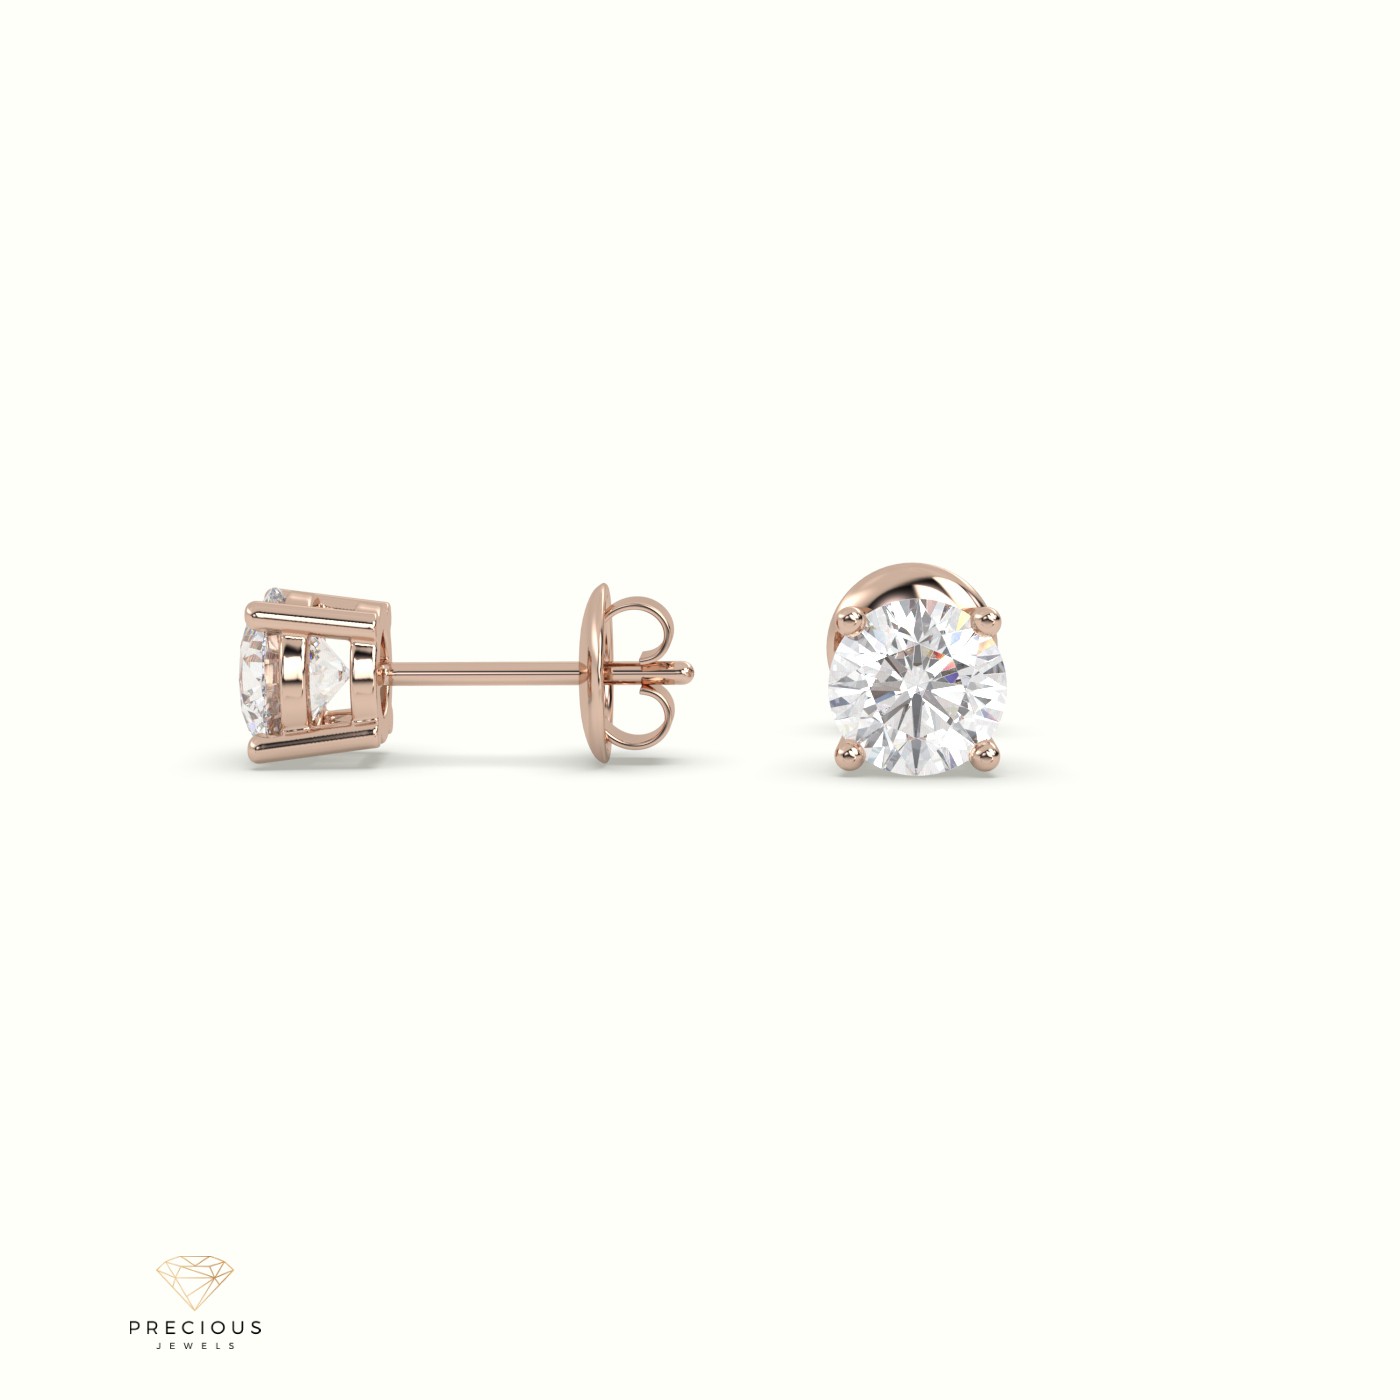 18k rose gold 4 prongs classic round diamond earring studs Photos & images